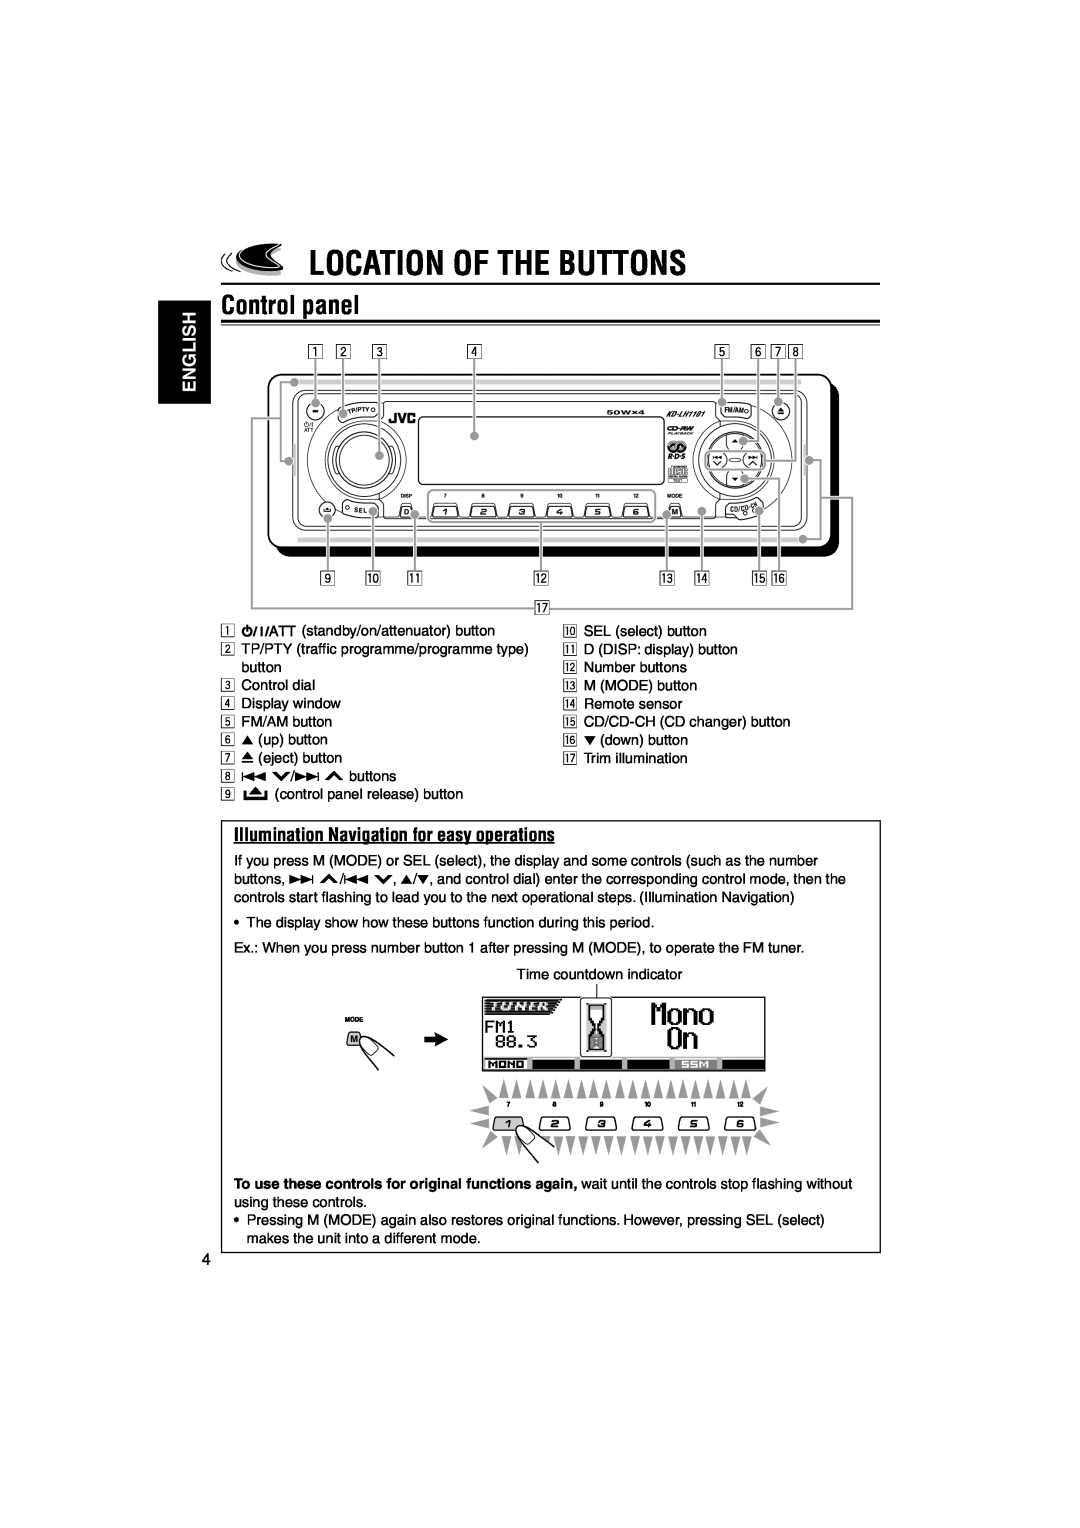 JVC KD-LH1101 manual Location Of The Buttons, Control panel, English, Illumination Navigation for easy operations 